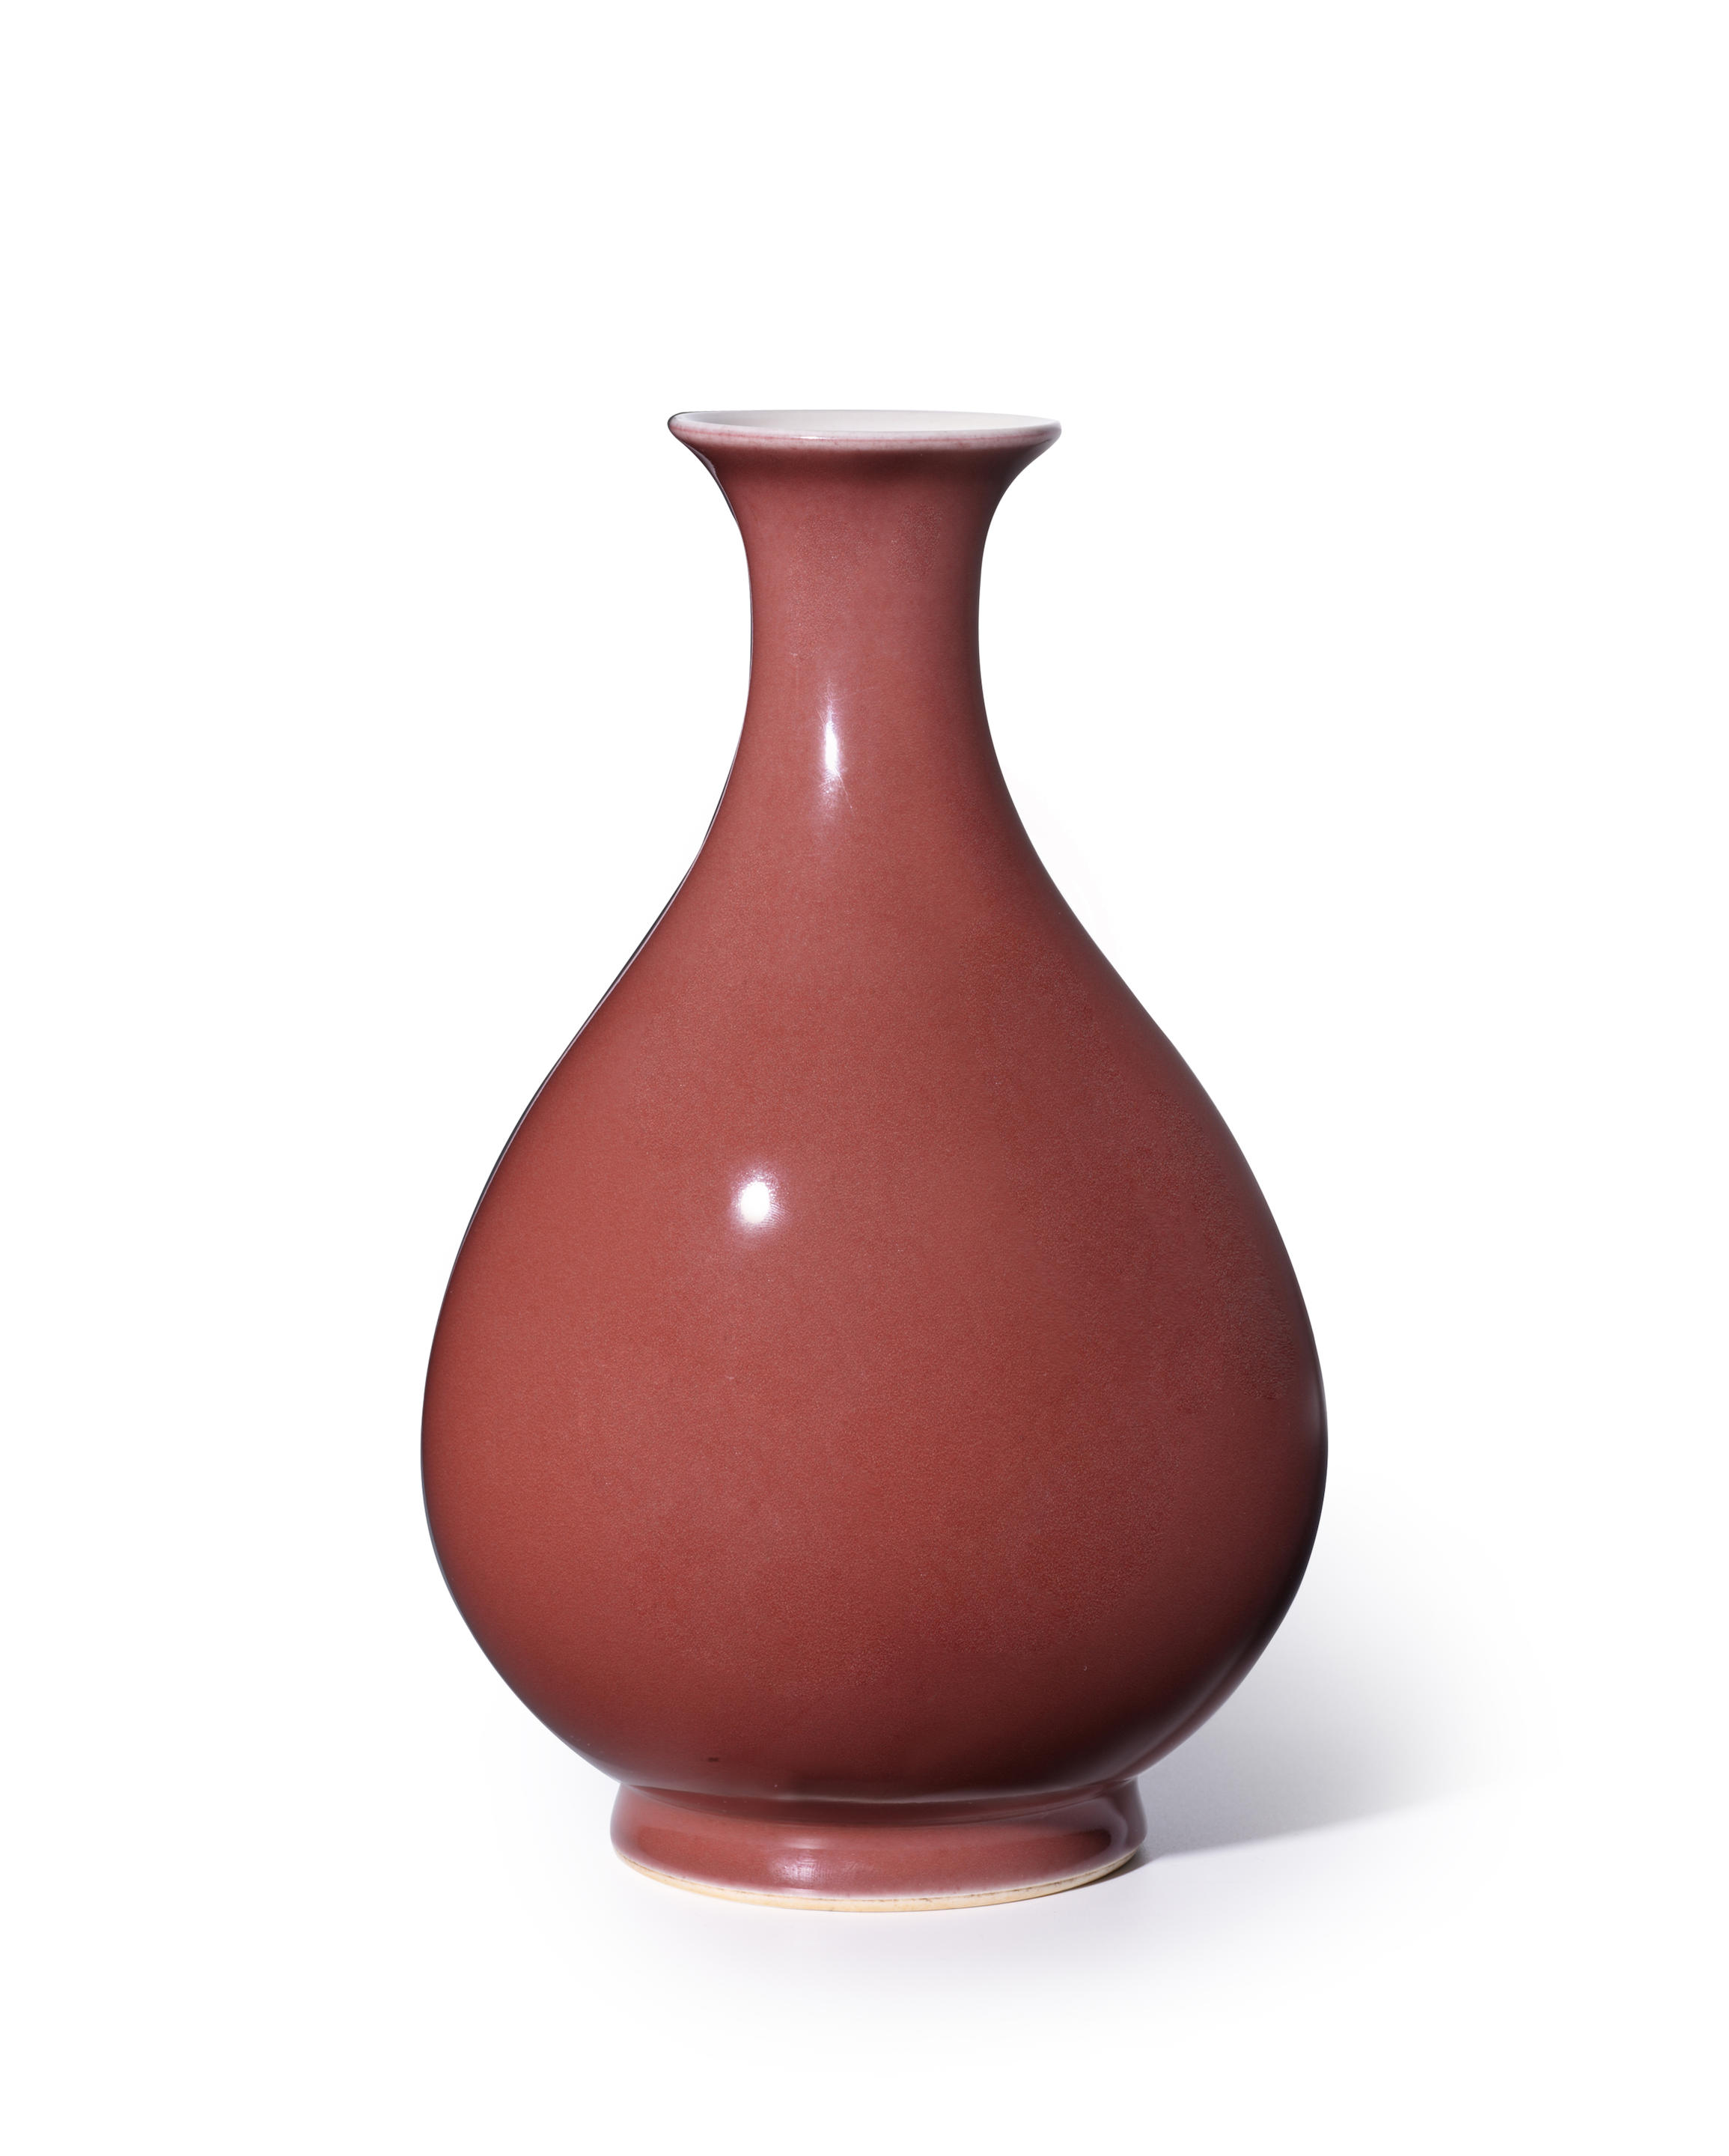 Bonhams : A COPPER-RED-GLAZED PEAR-SHAPED VASE, YUHUCHUNPING Qianlong seal  mark and of the period